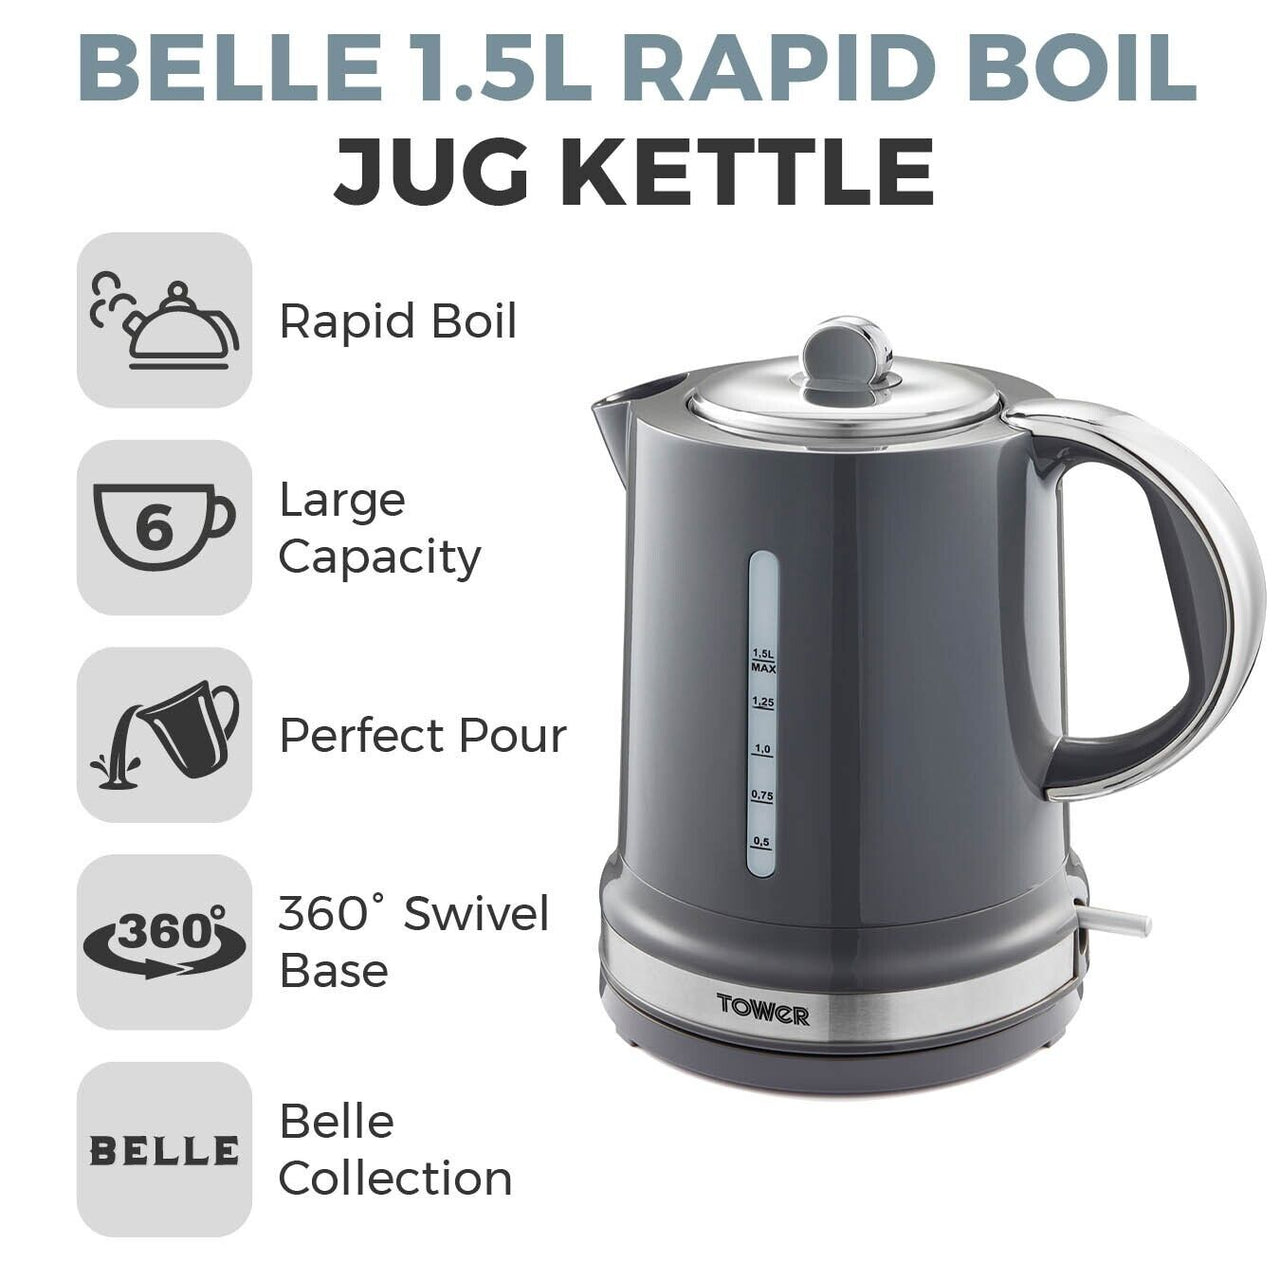 Tower Belle Kettle Toaster Canisters Mug Tree & Towel Pole Set in Graphite Grey